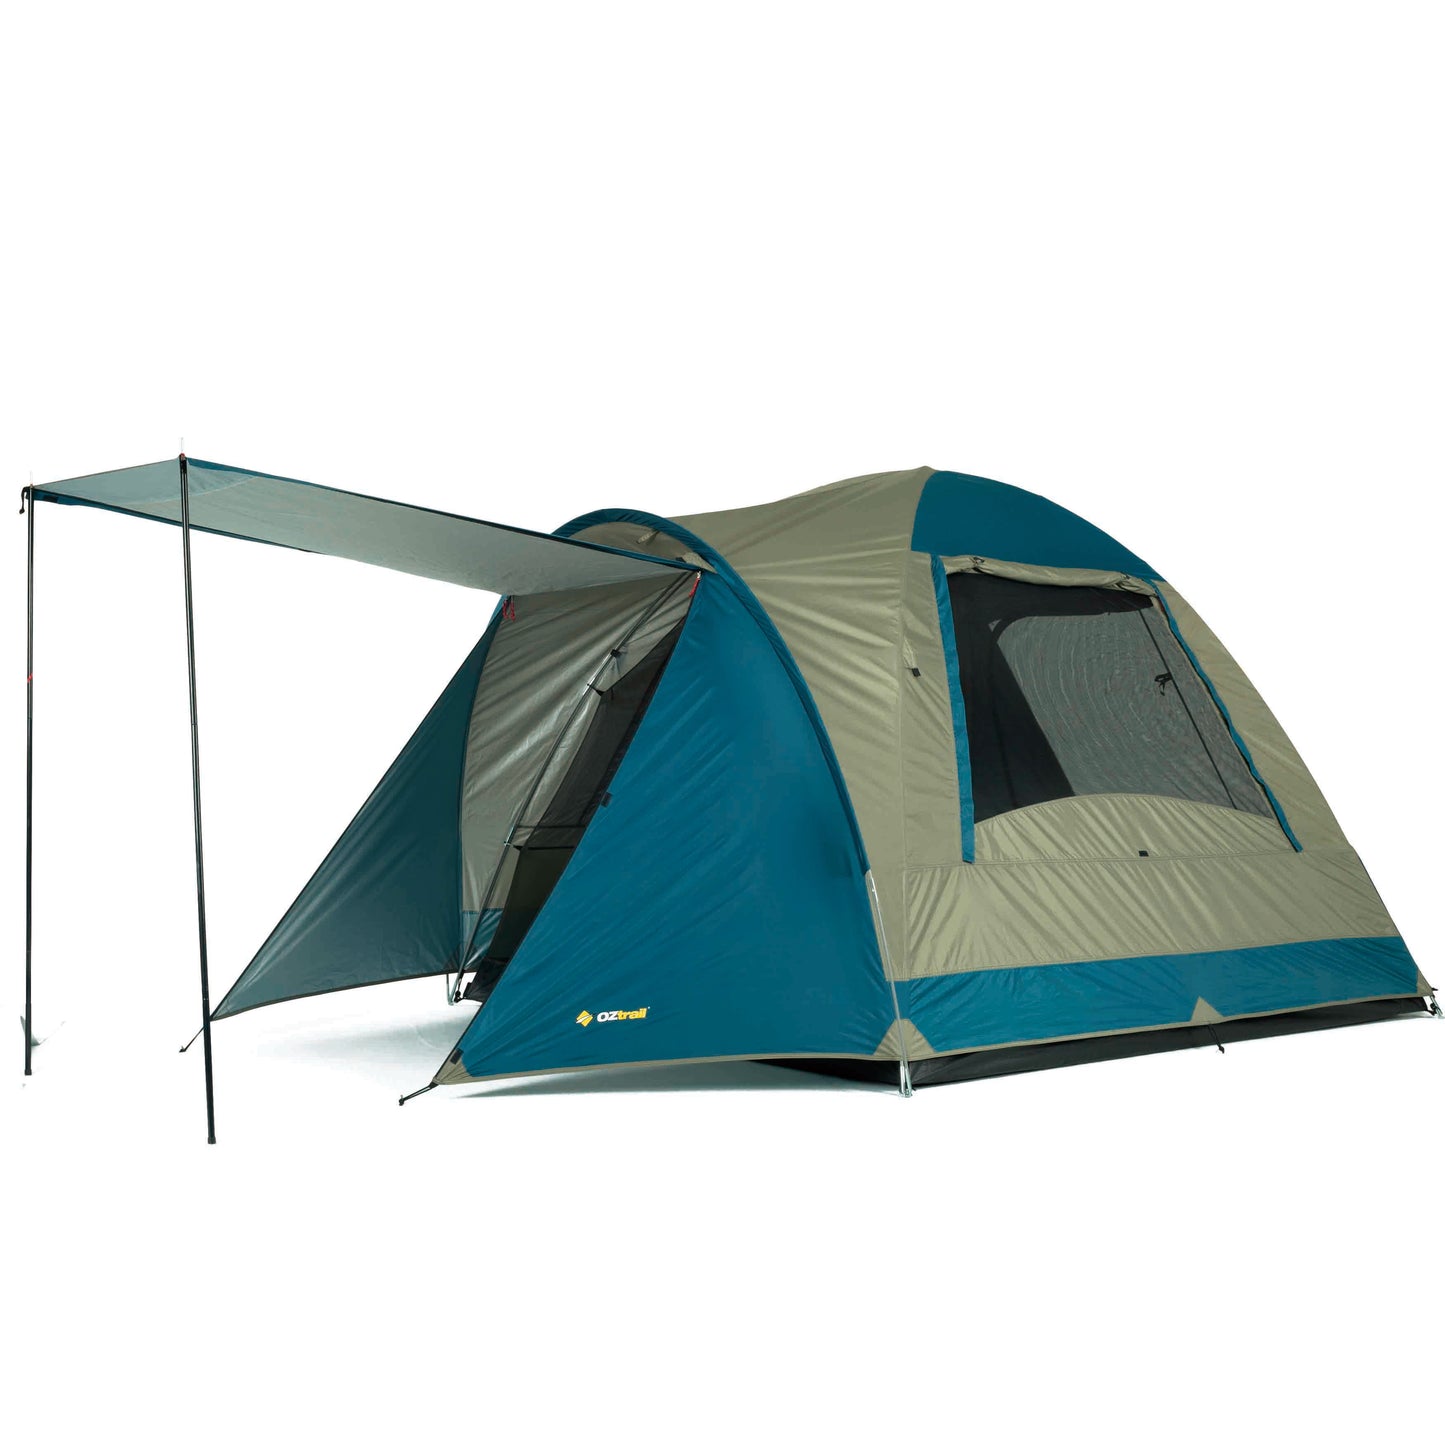 Oztrail Tasman 4V Tent -- New(Awning Poles Excluded)